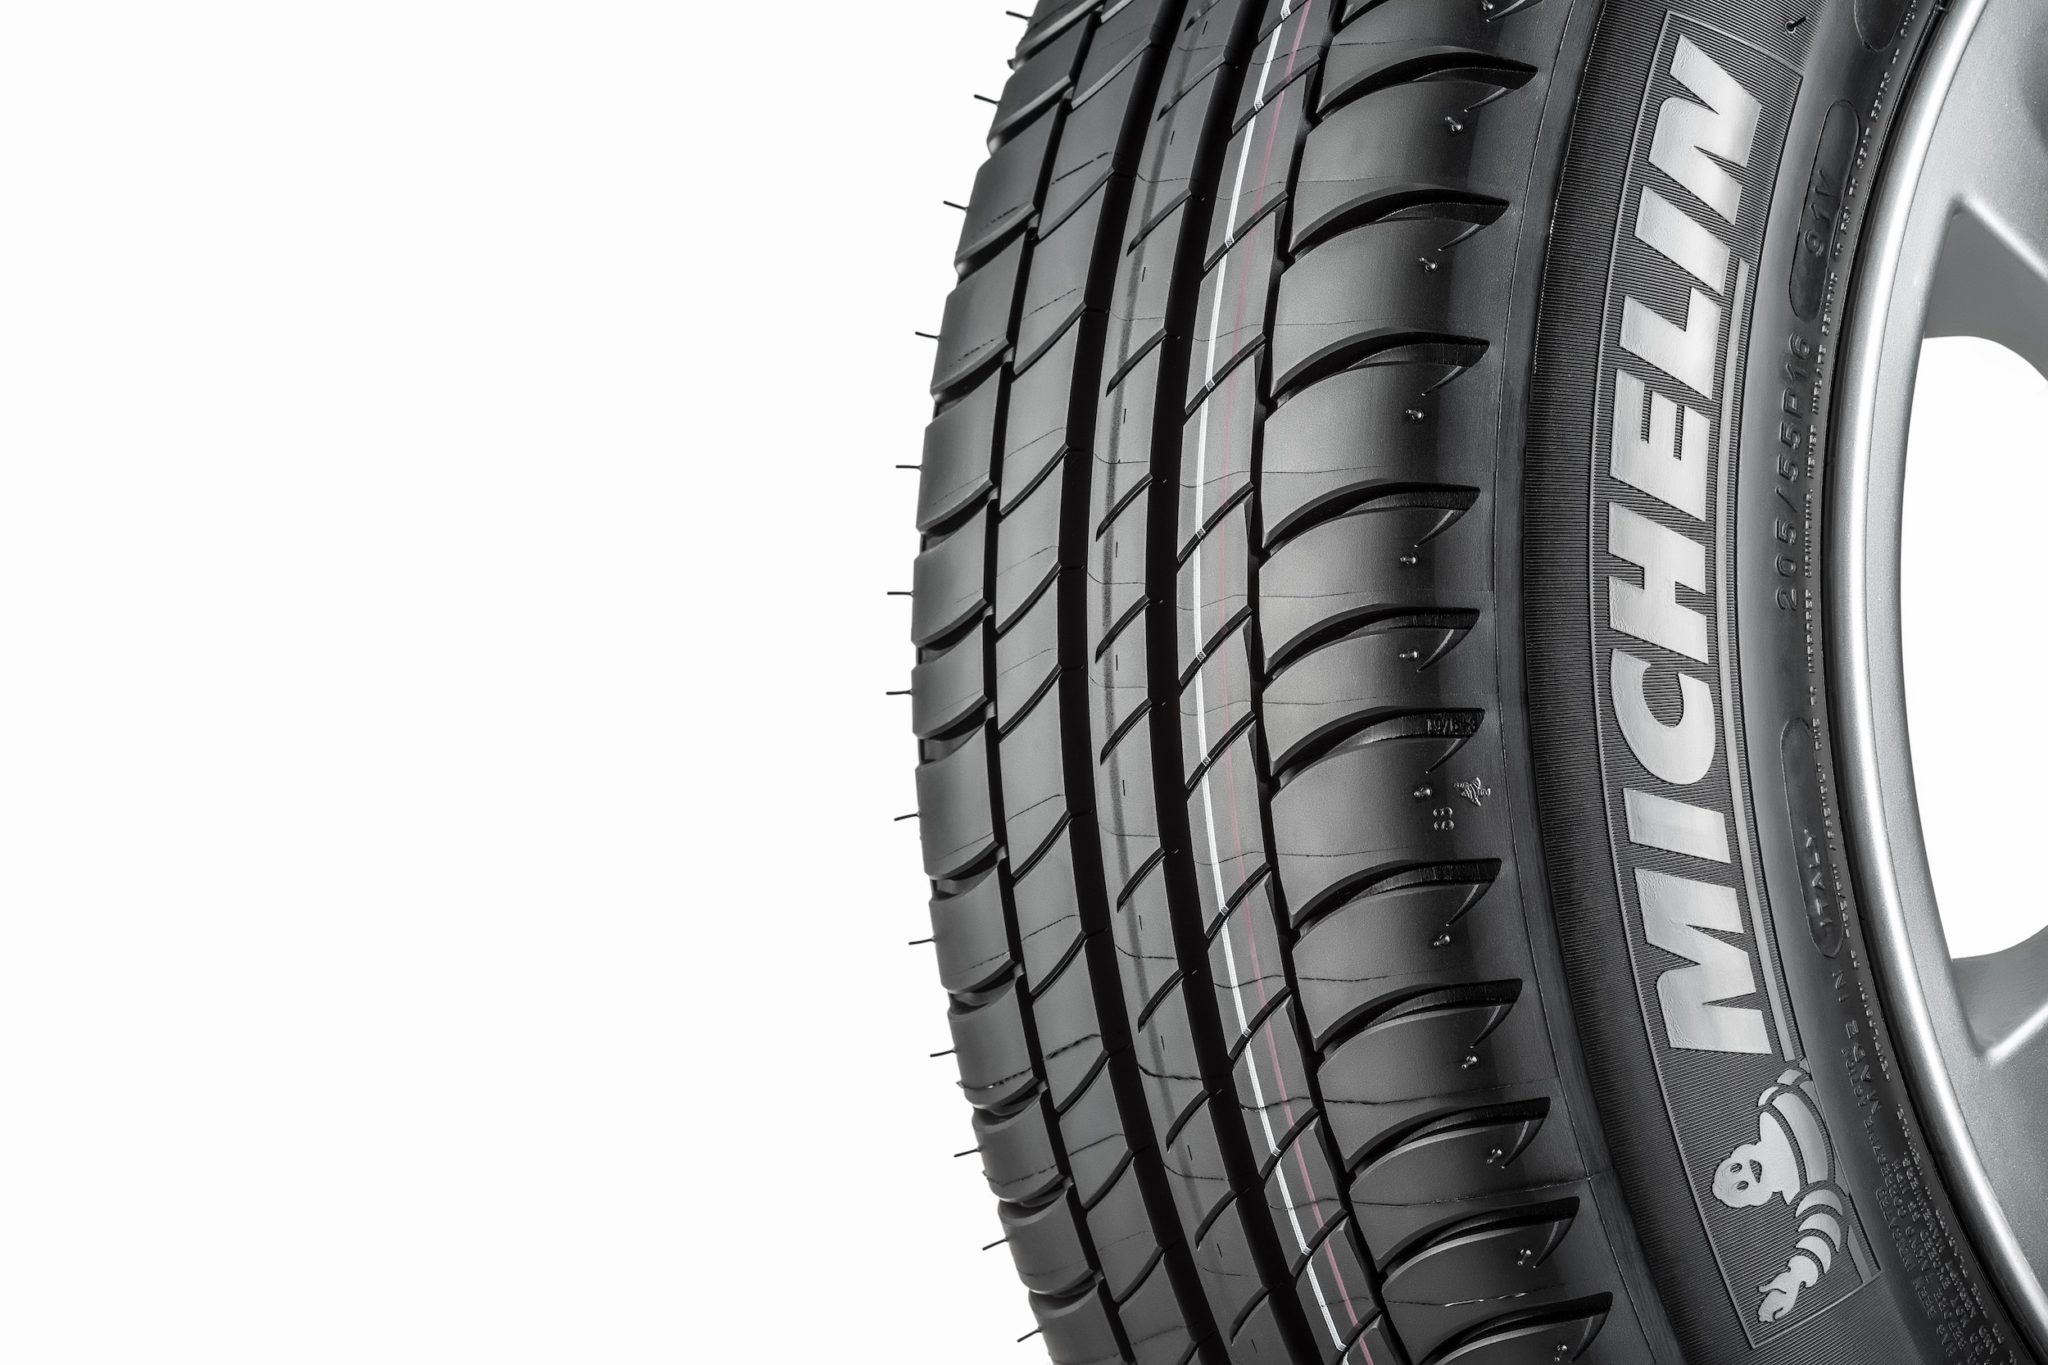 Are There Any Recalls On Michelin Tires